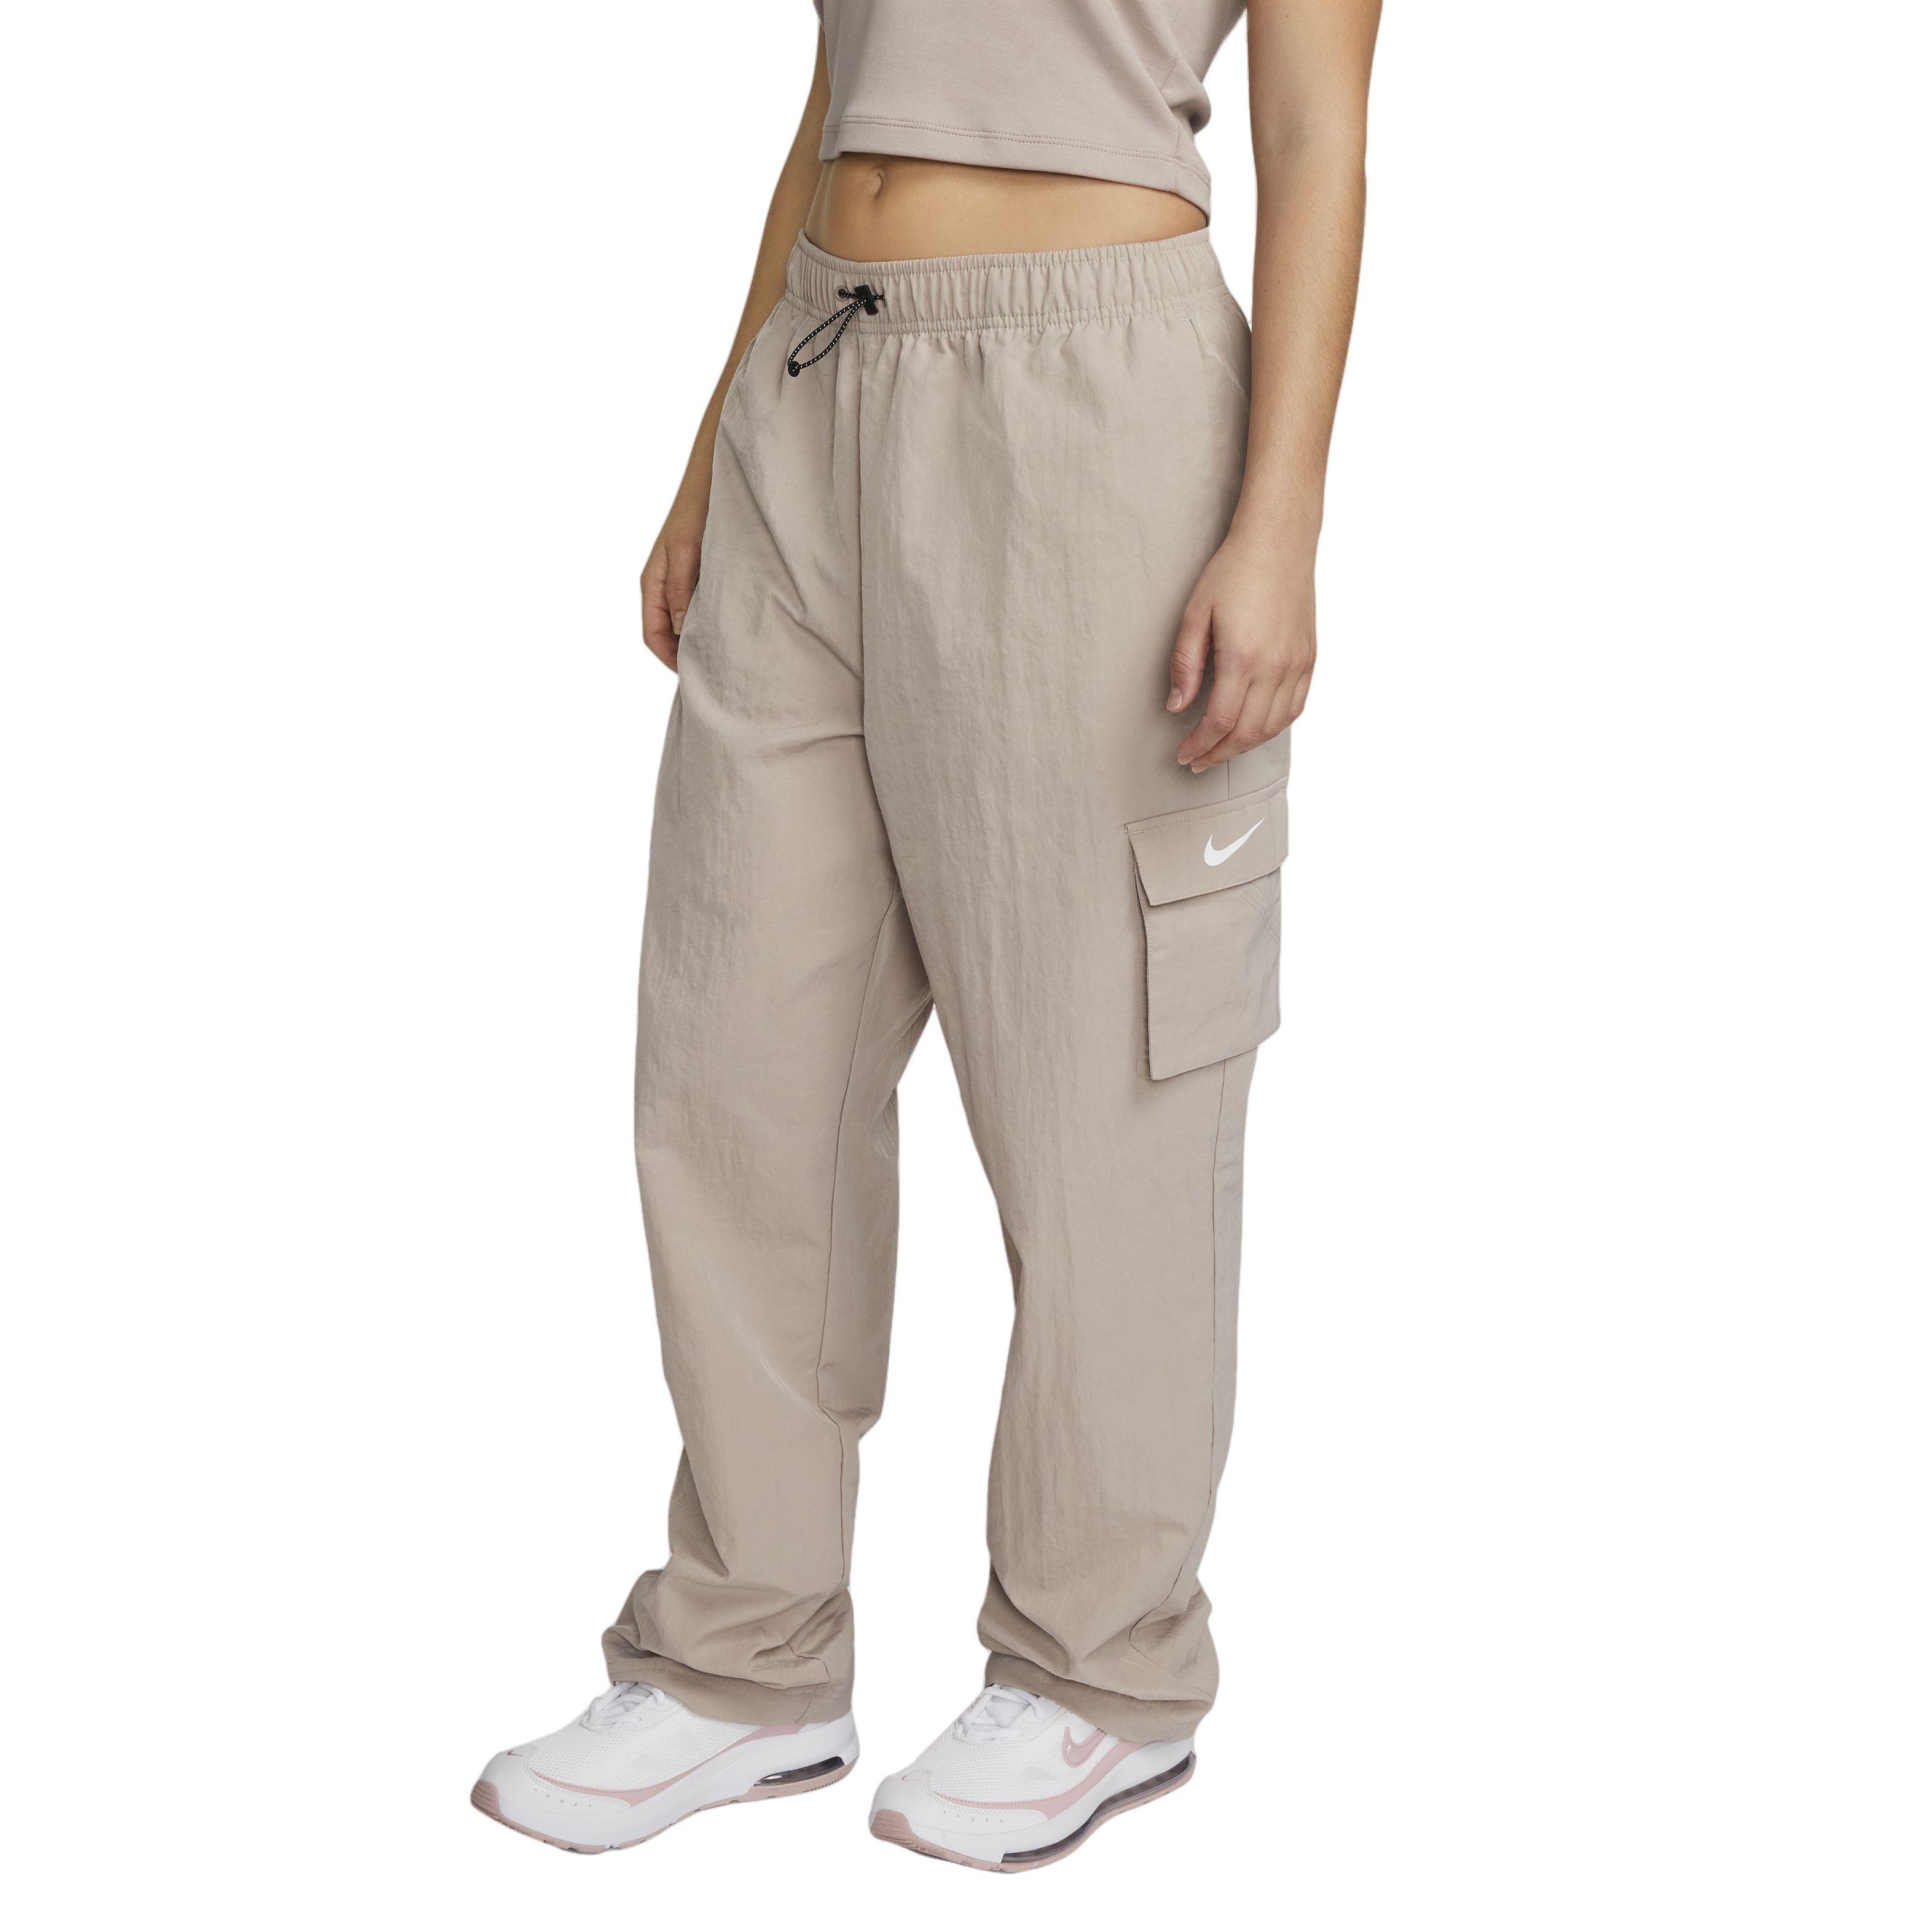 Nike Trend Woven baggy Parachute Pants in Blue